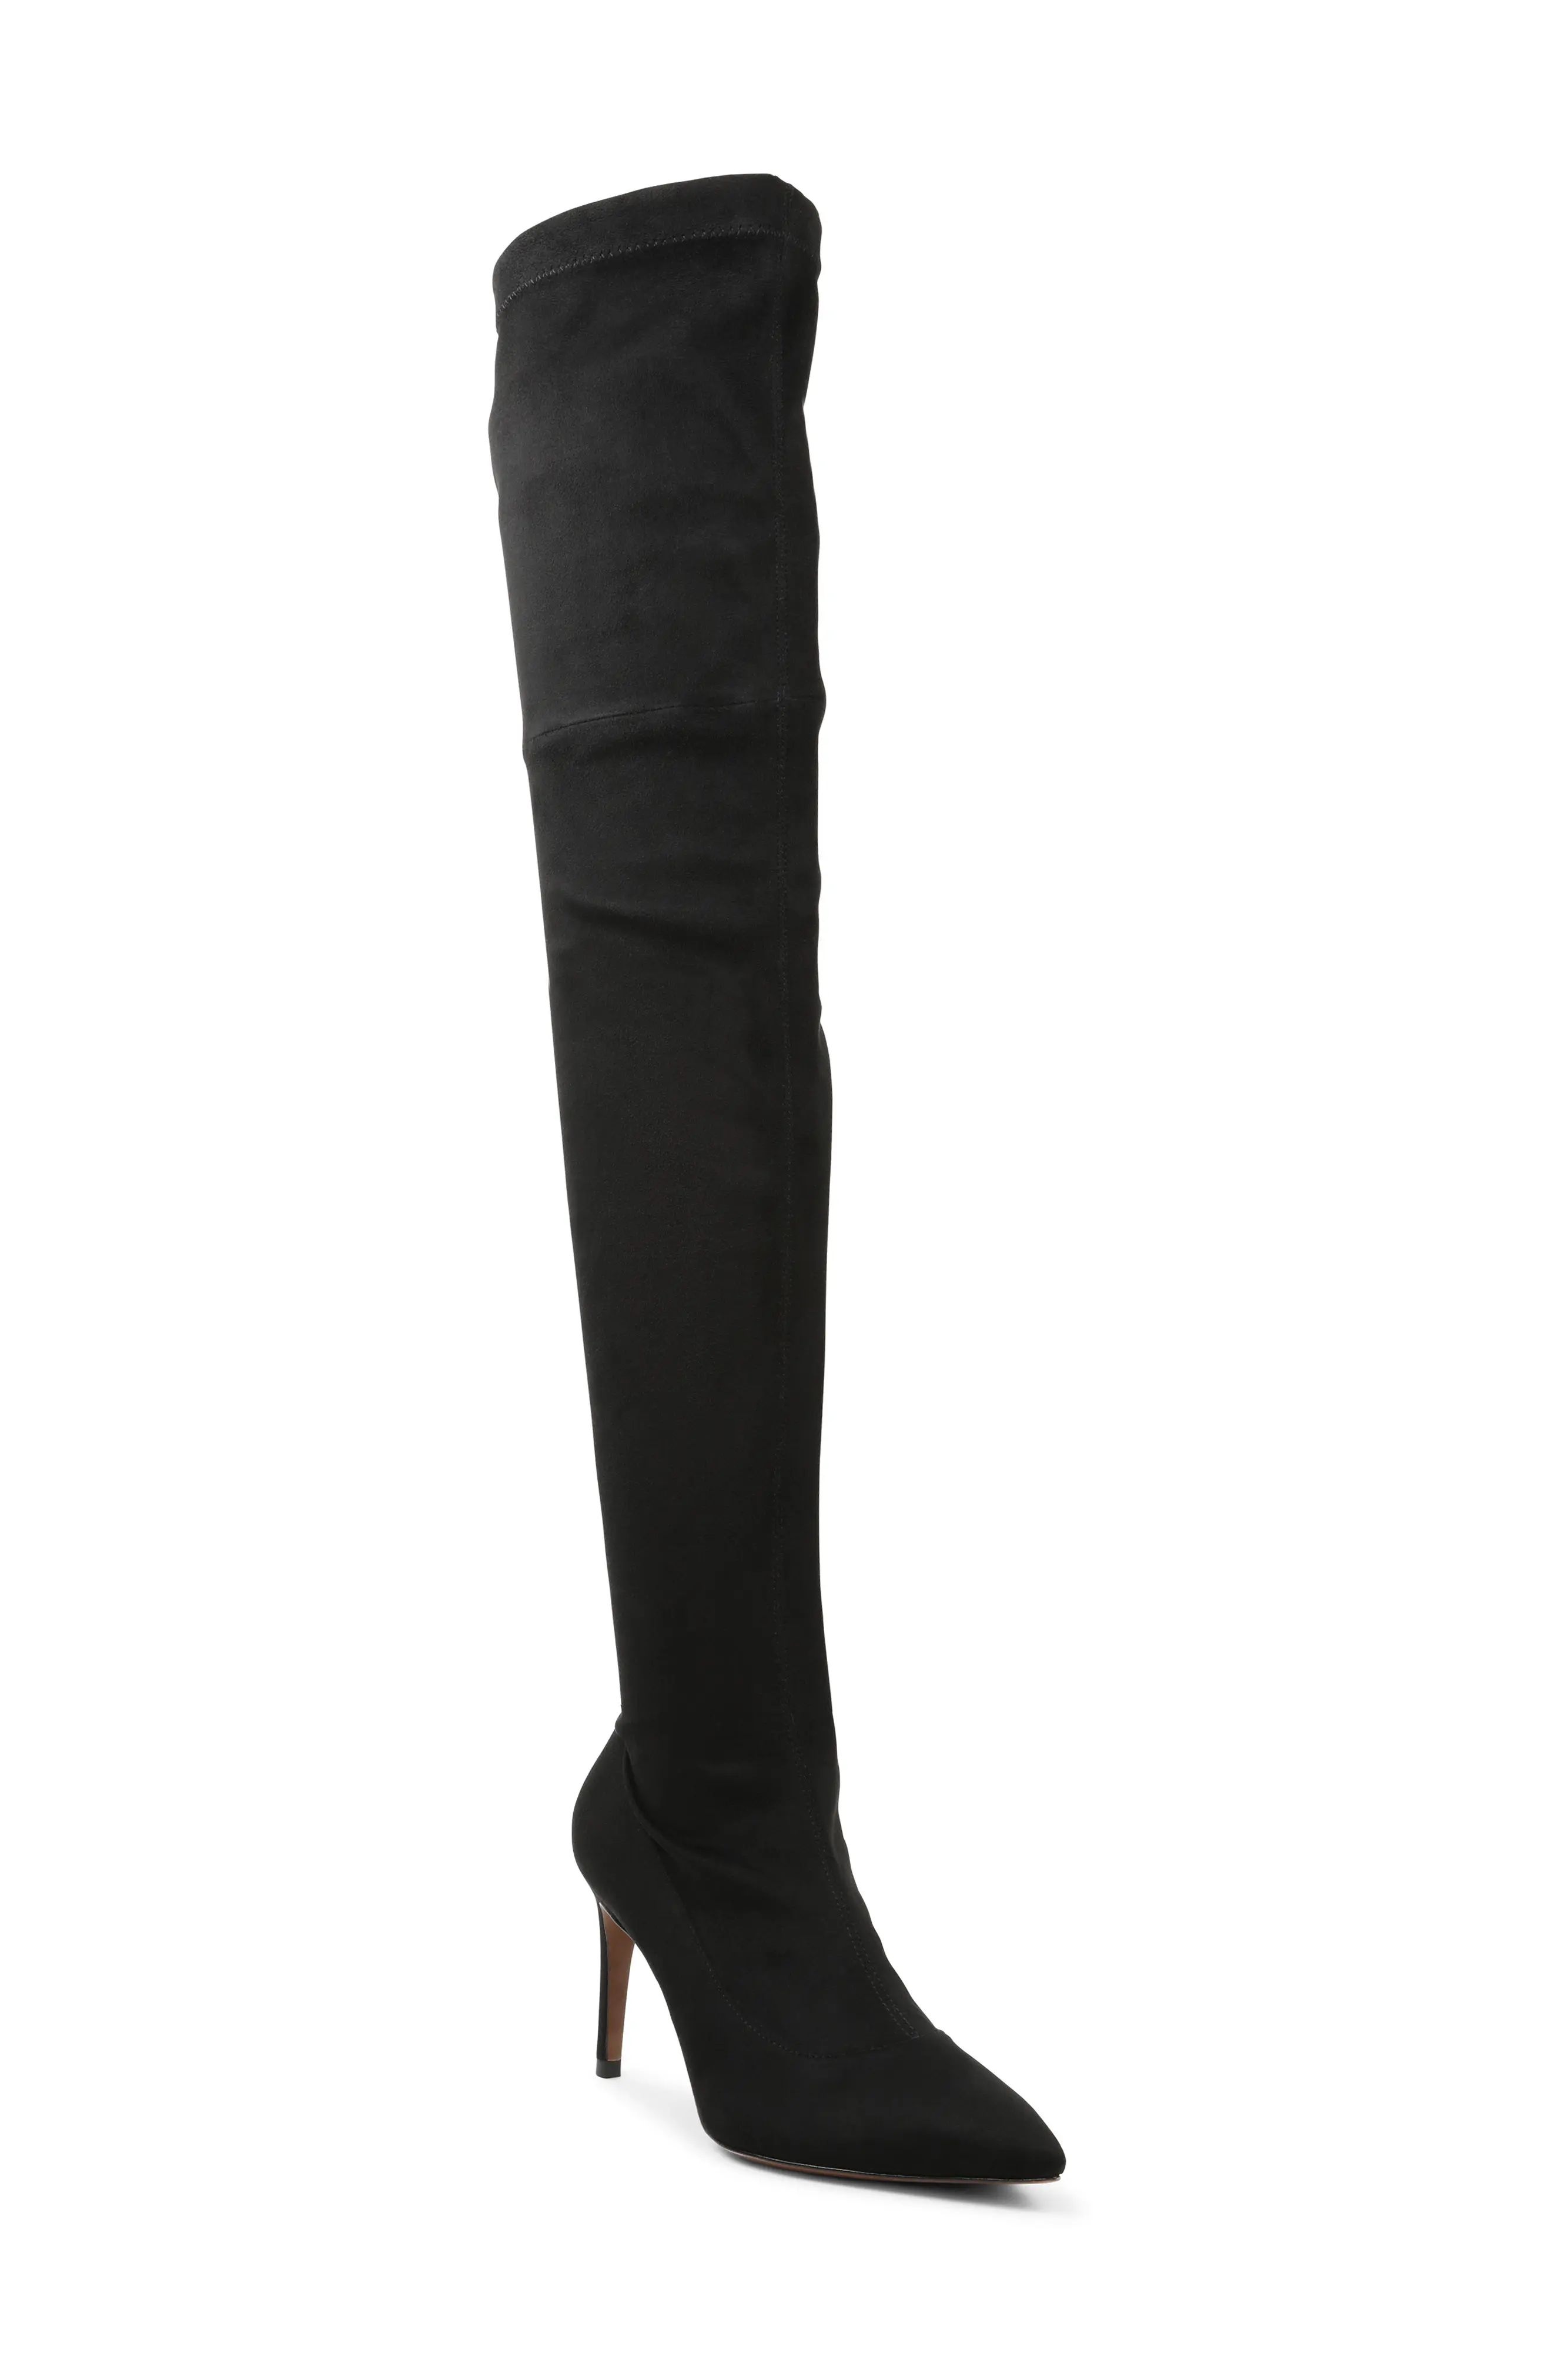 BCBGMAXAZRIA Lisa Thigh High Boot in Black at Nordstrom, Size 7.5 | Nordstrom